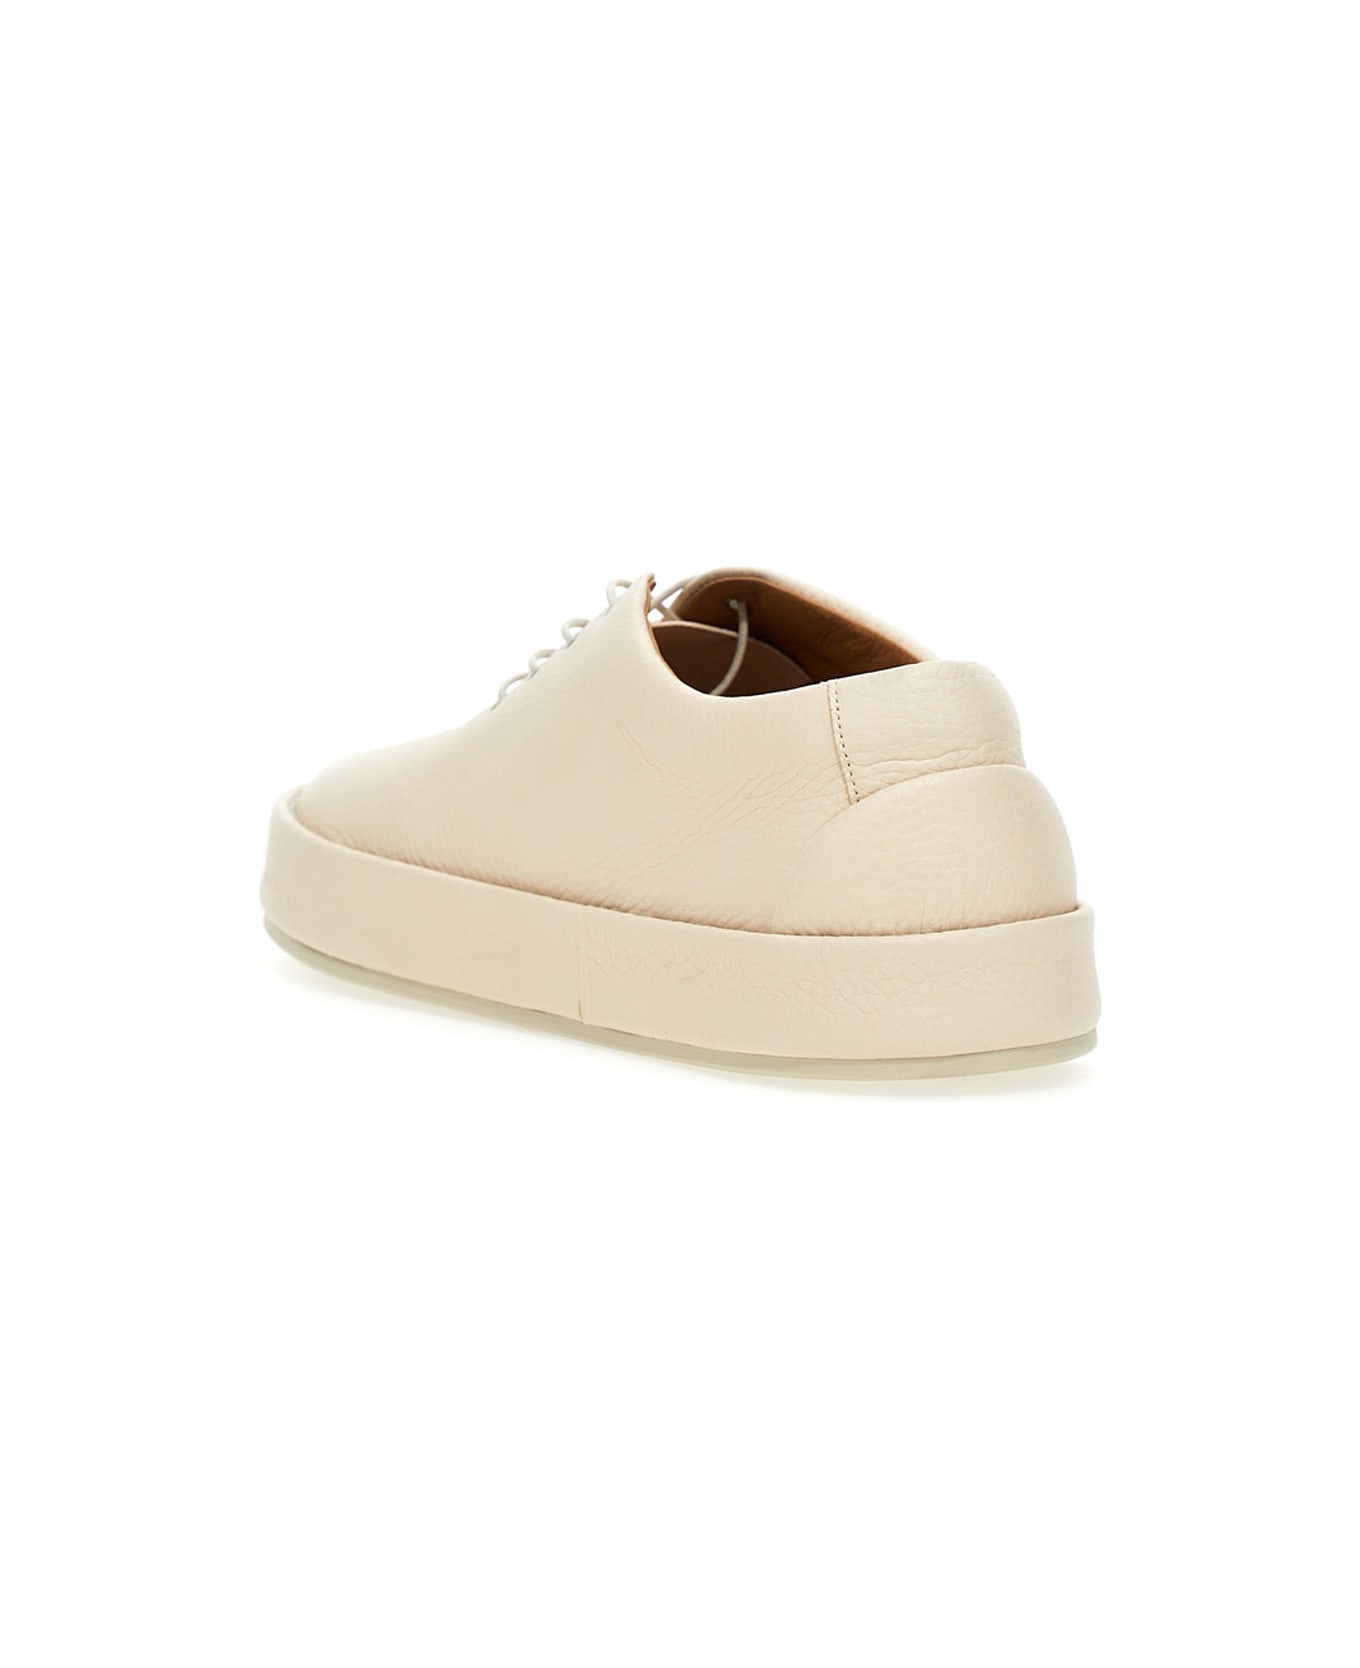 Marsell 'cassapelle' Derby Shoes - White